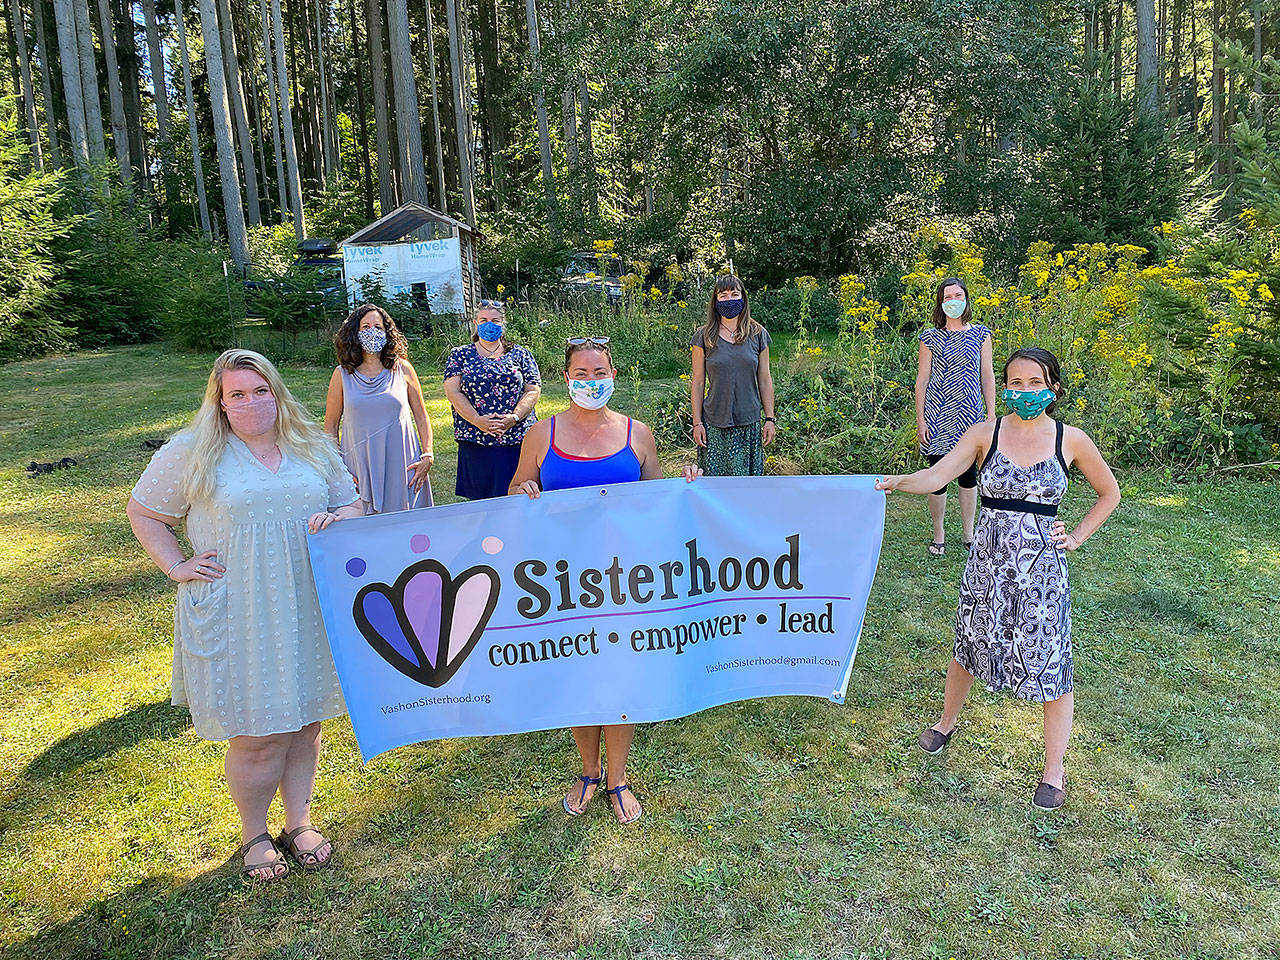 The Sisterhood board of directors and executive director.From left to right, front row: Sophie Gagnaire, Elizabeth Archambault, Siri Bookani. From left to right, back row: Marjorie Butcher, Yvette Butler, Laura Camner and Emily Graham (Courtesy Photo).